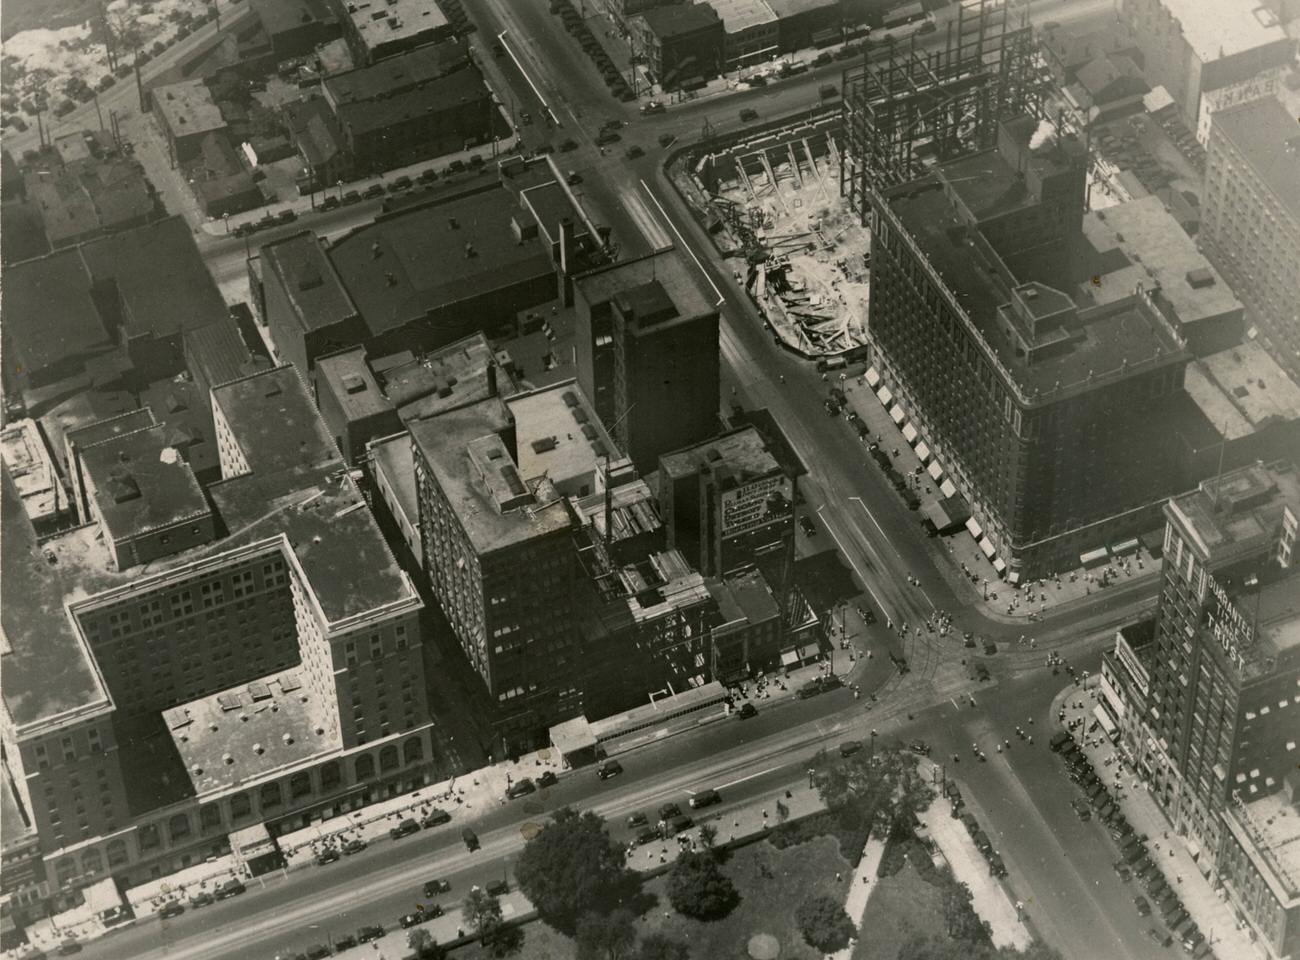 Aerial view of Broad and High Streets with the under-construction LeVeque Tower, 1925.